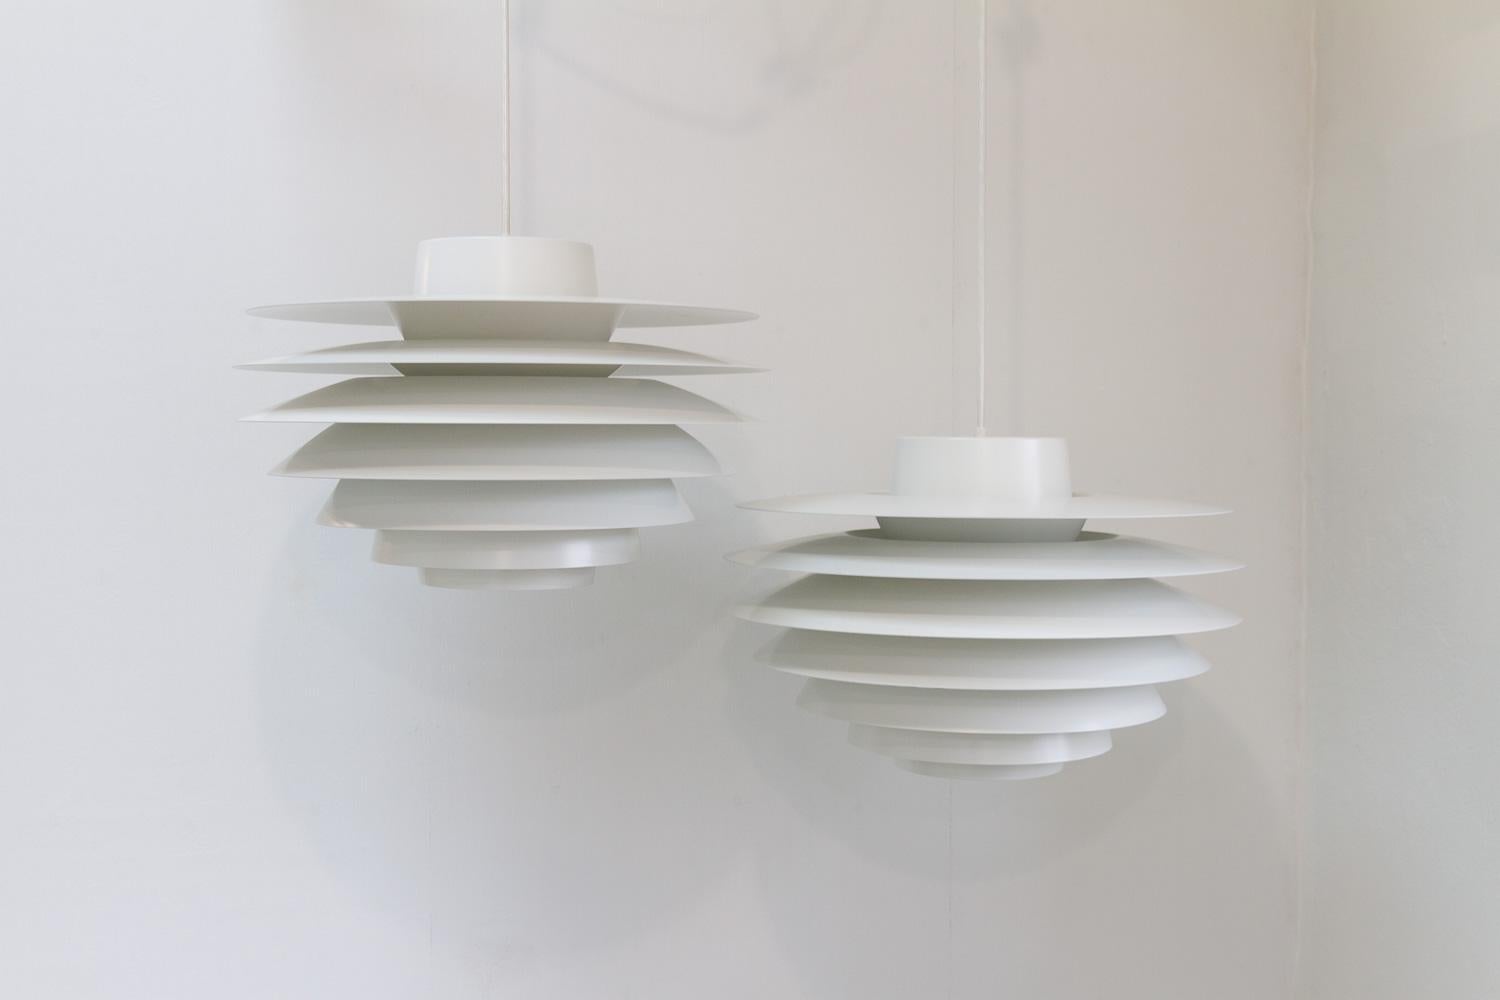 Vintage Scandinavian Modern ceiling pendants Verona 485 by Sven Middelboe, 1990s. Set of 2.
Pair of large pendants in white aluminium with seven circular shades, each shade is angled so the light is reflected and evenly dispersed softly and